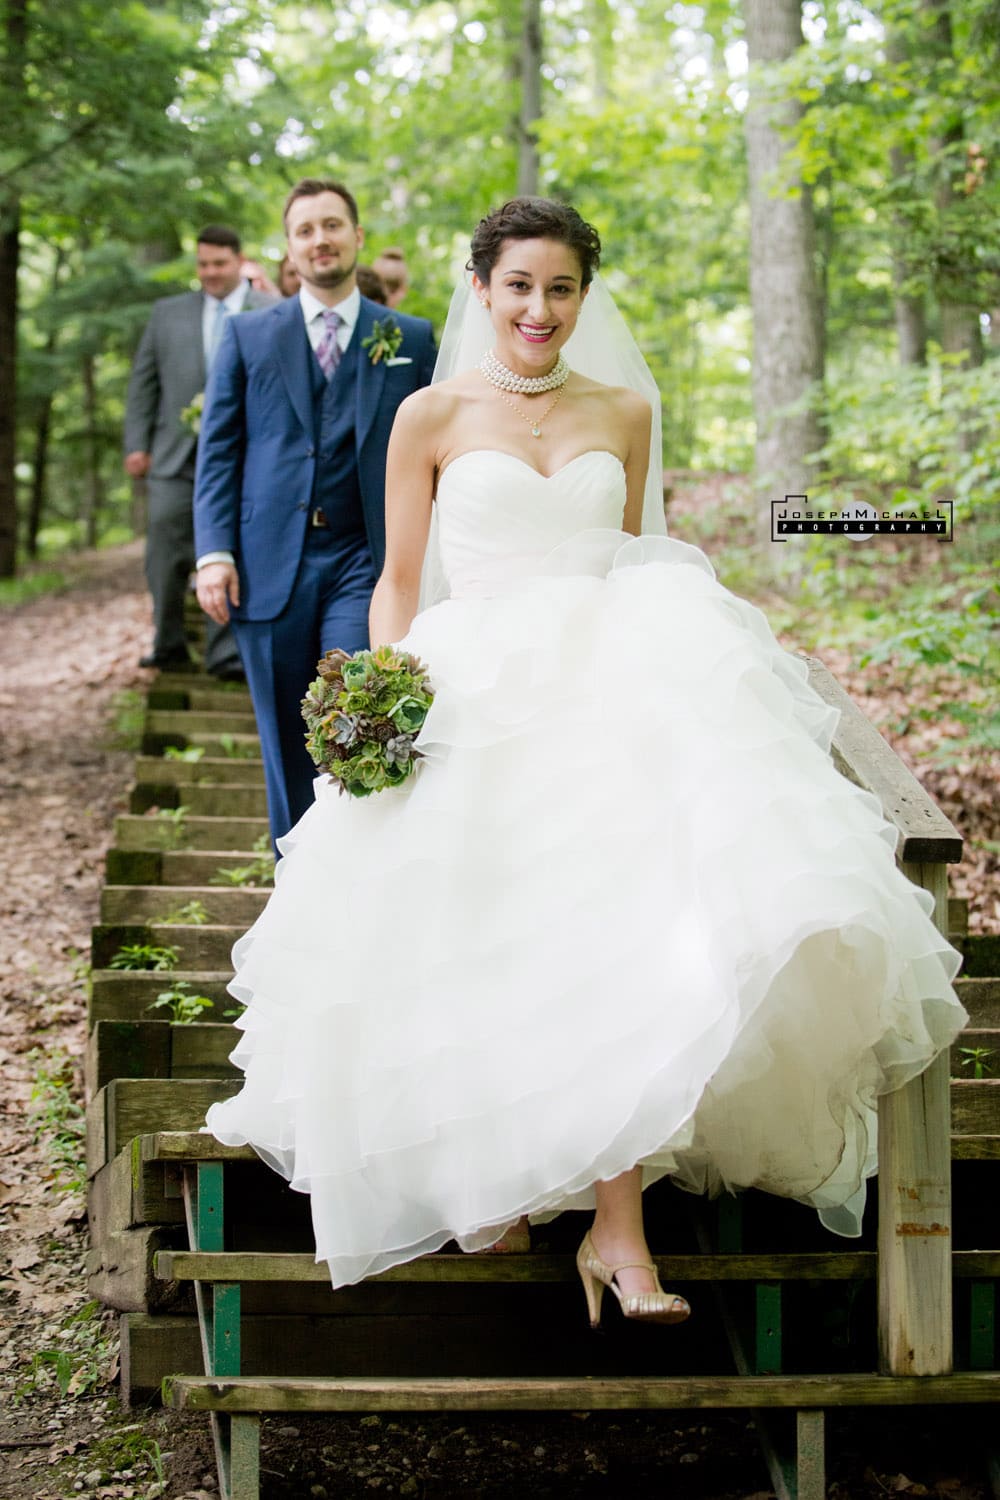 Kortright Centre for Conservation Wedding Photos